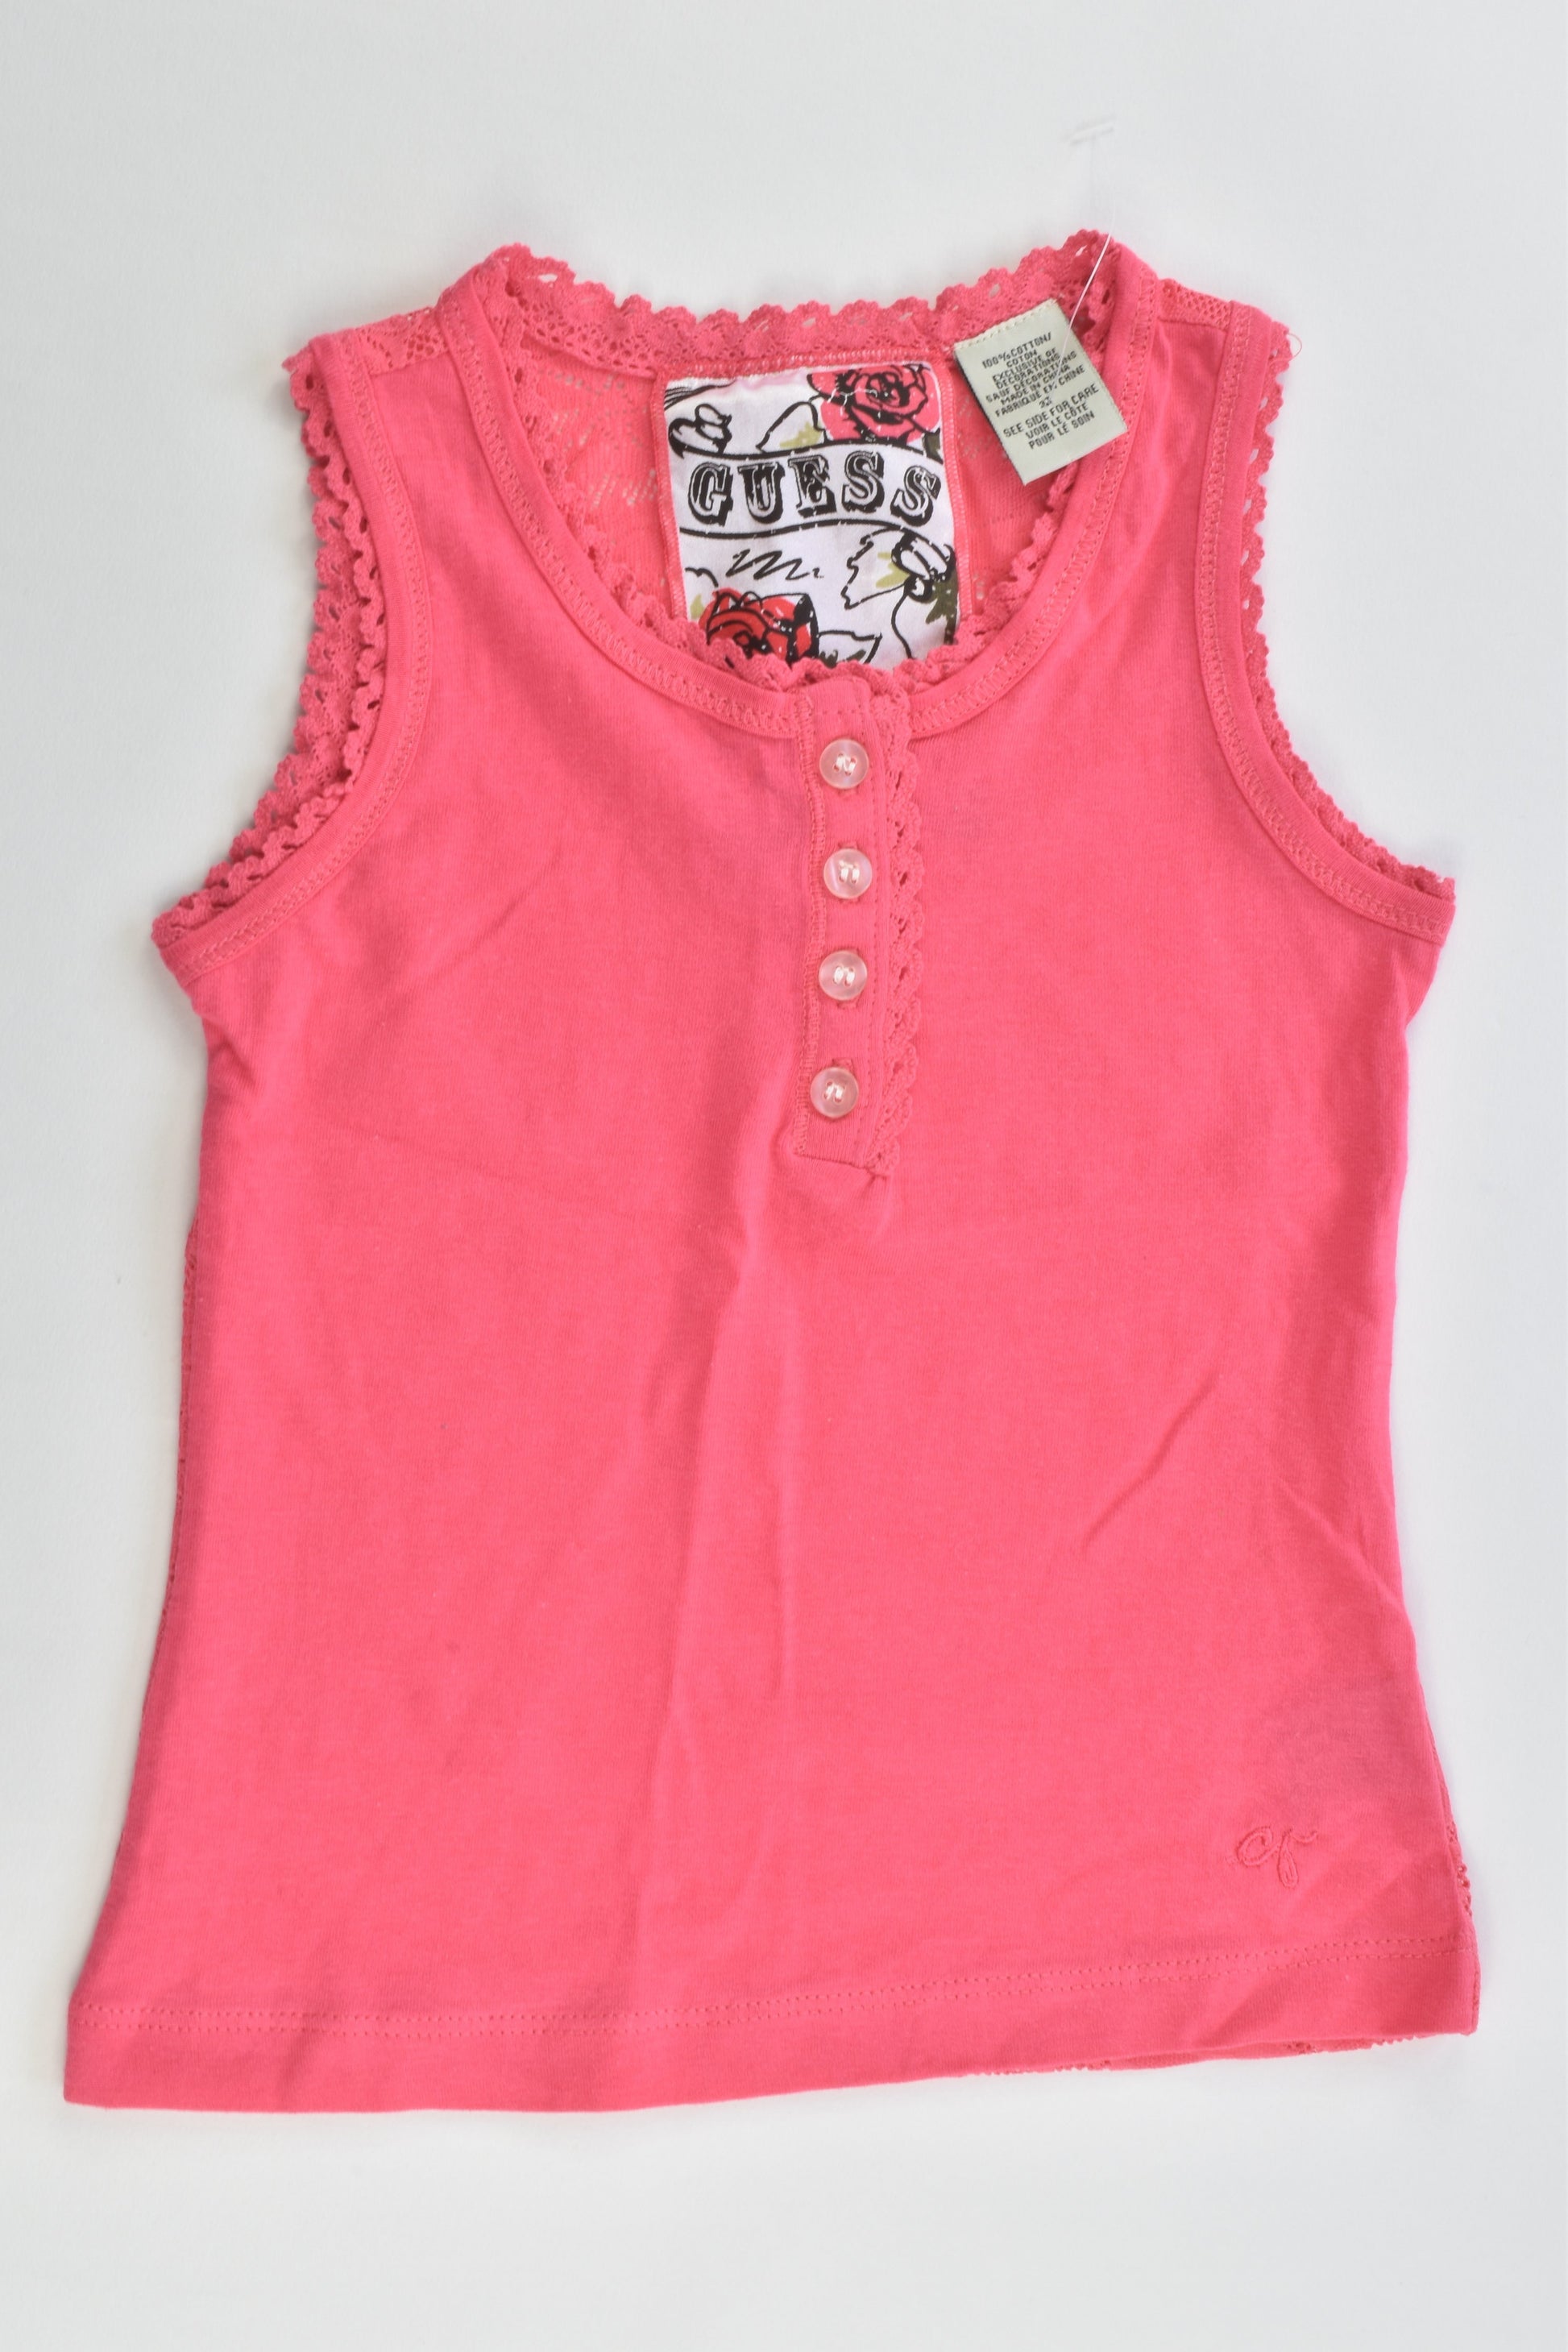 NEW Guess Size 3 Top